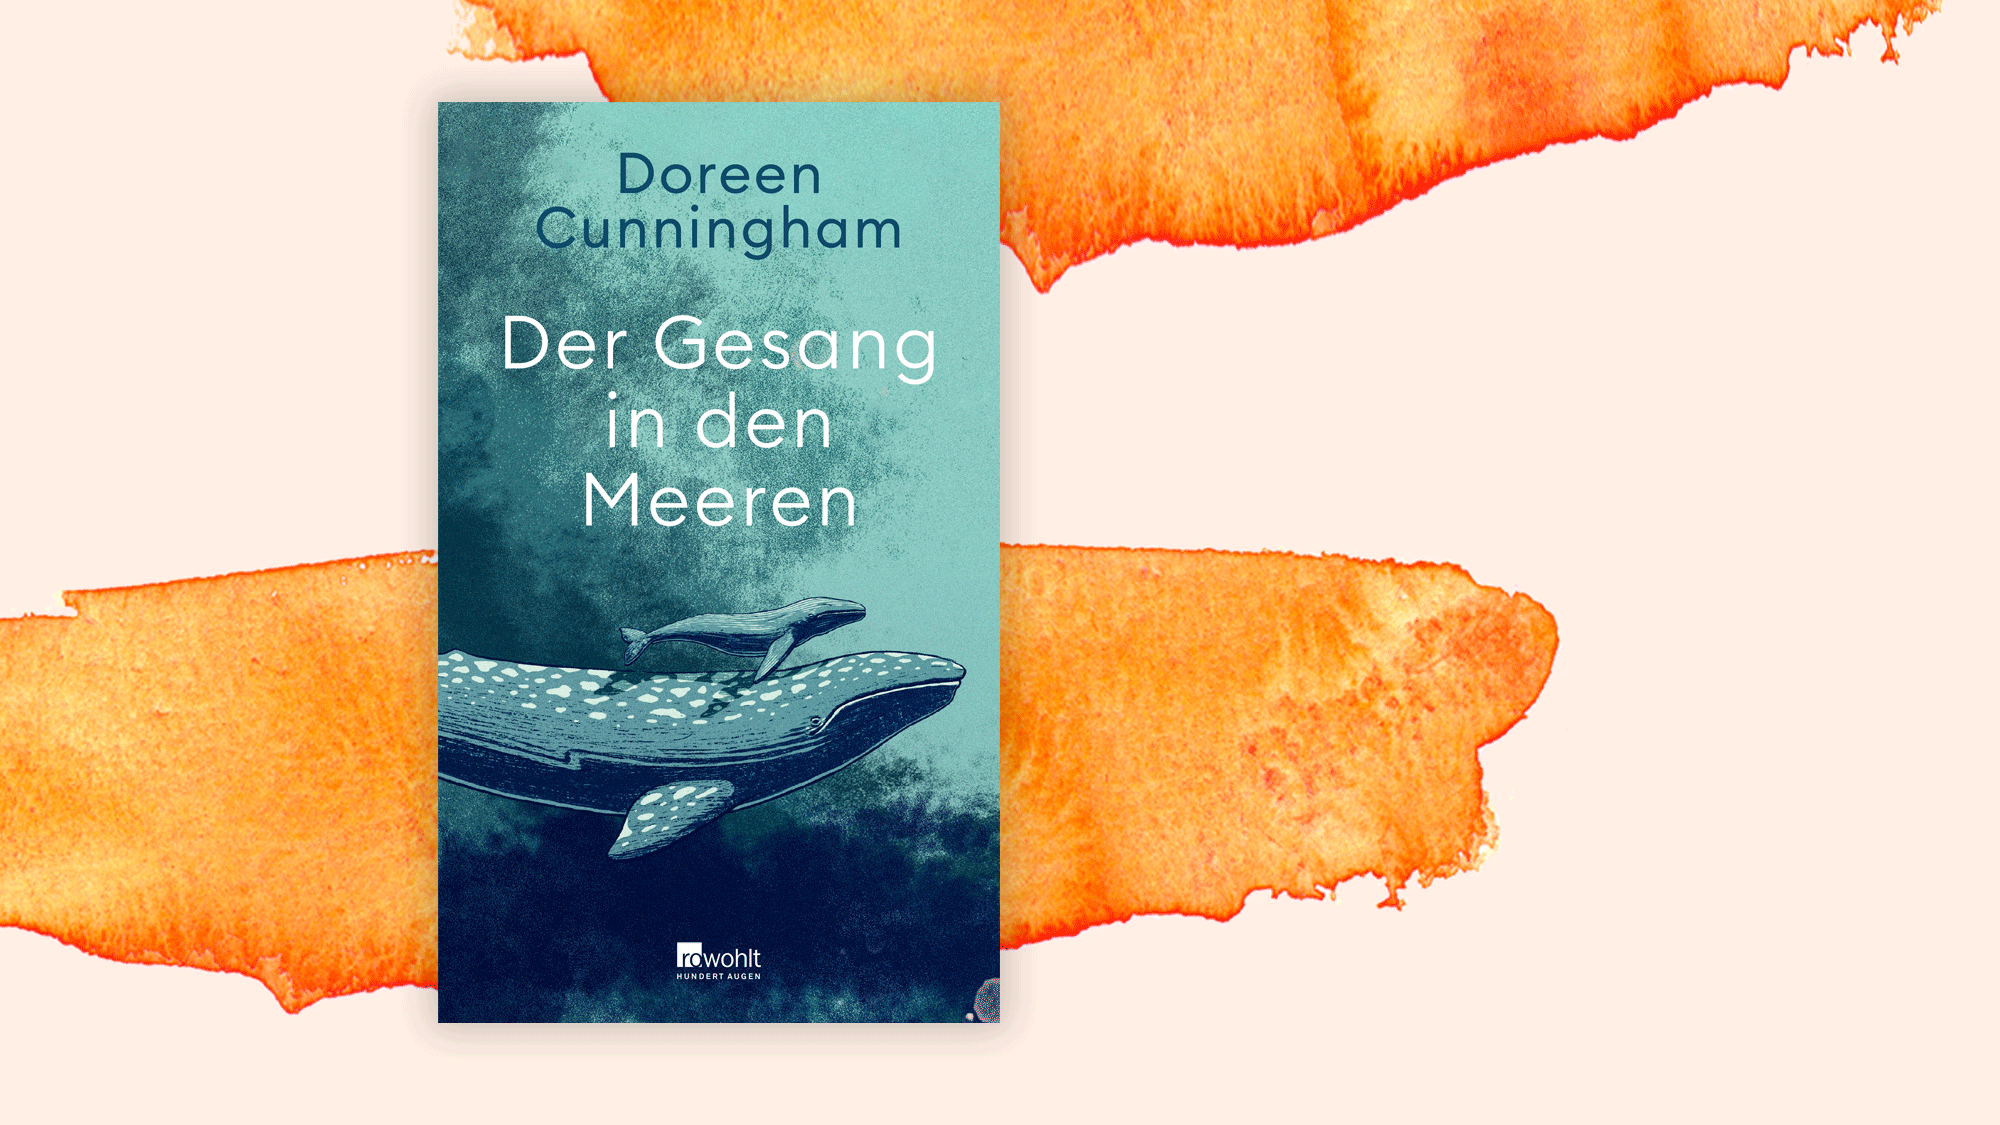 Doreen Cunningham: “The Song in the Seas” – Gray Giants